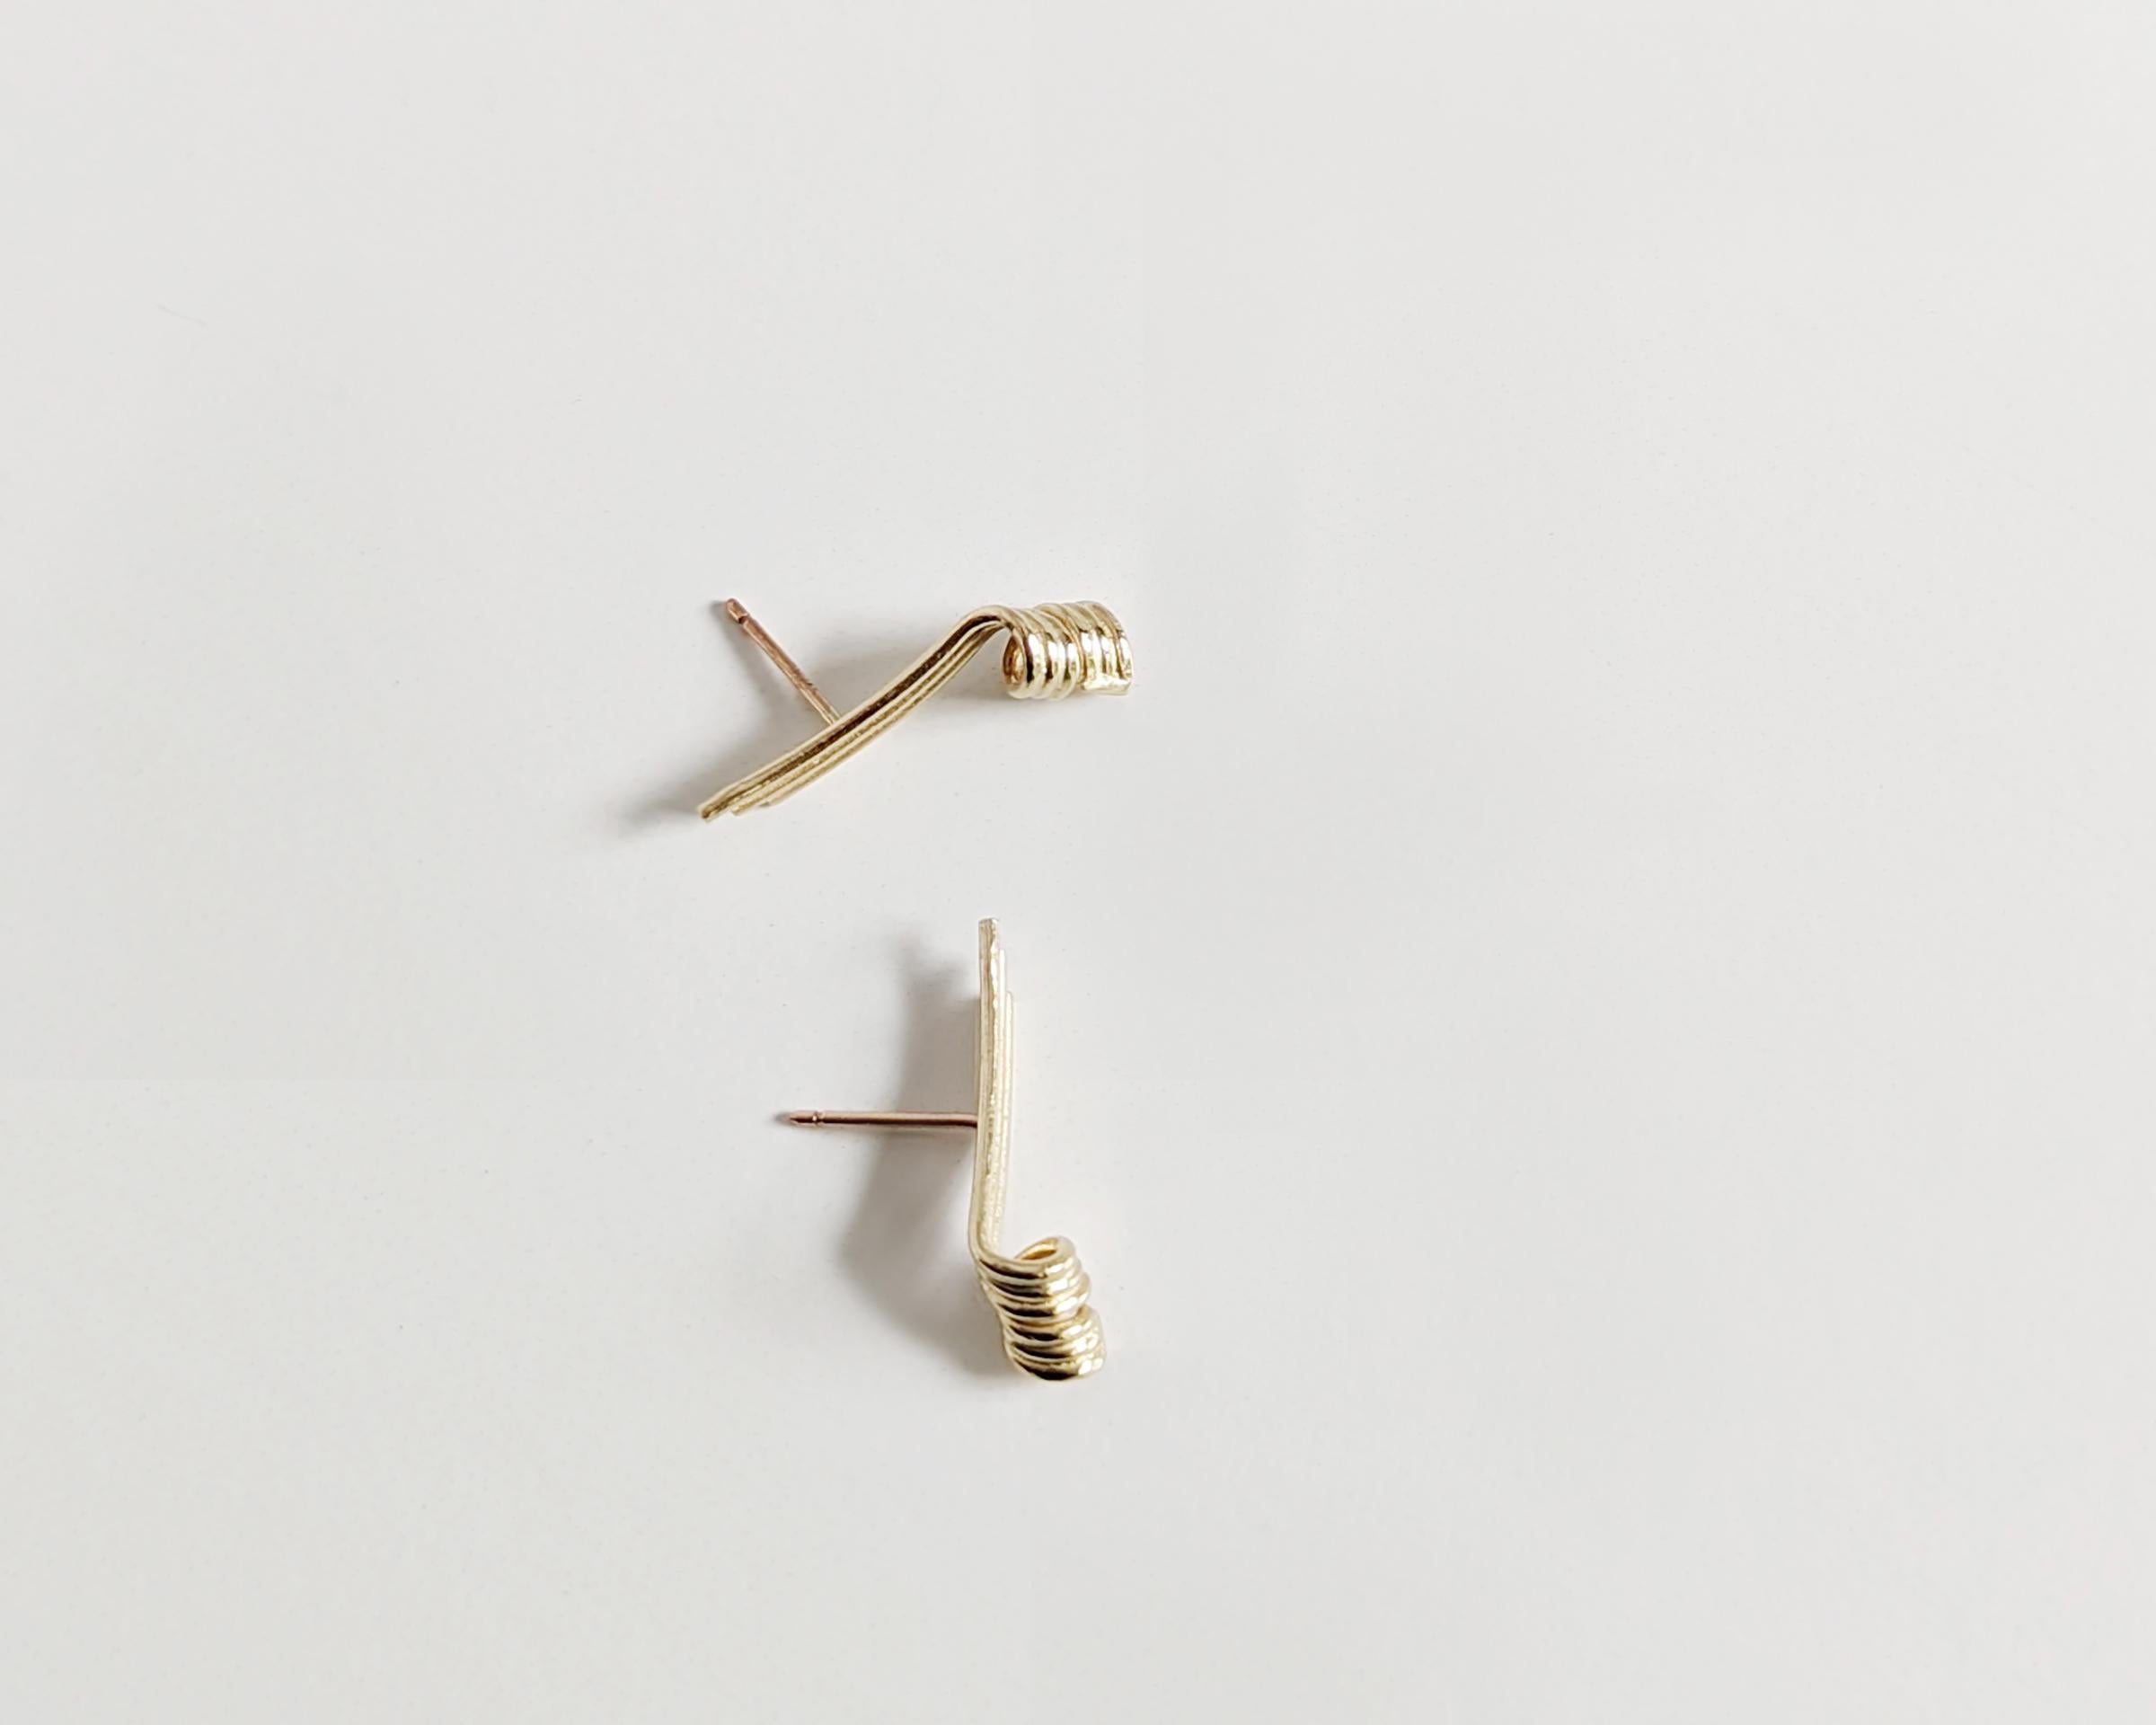 A three-dimensional twist to bar studs… The satisfying curves of spiraling loops rolled into a tubular bar add a unique twist and energy. The corkscrew-style earrings add finesse and effortlessly elevate your outfit.